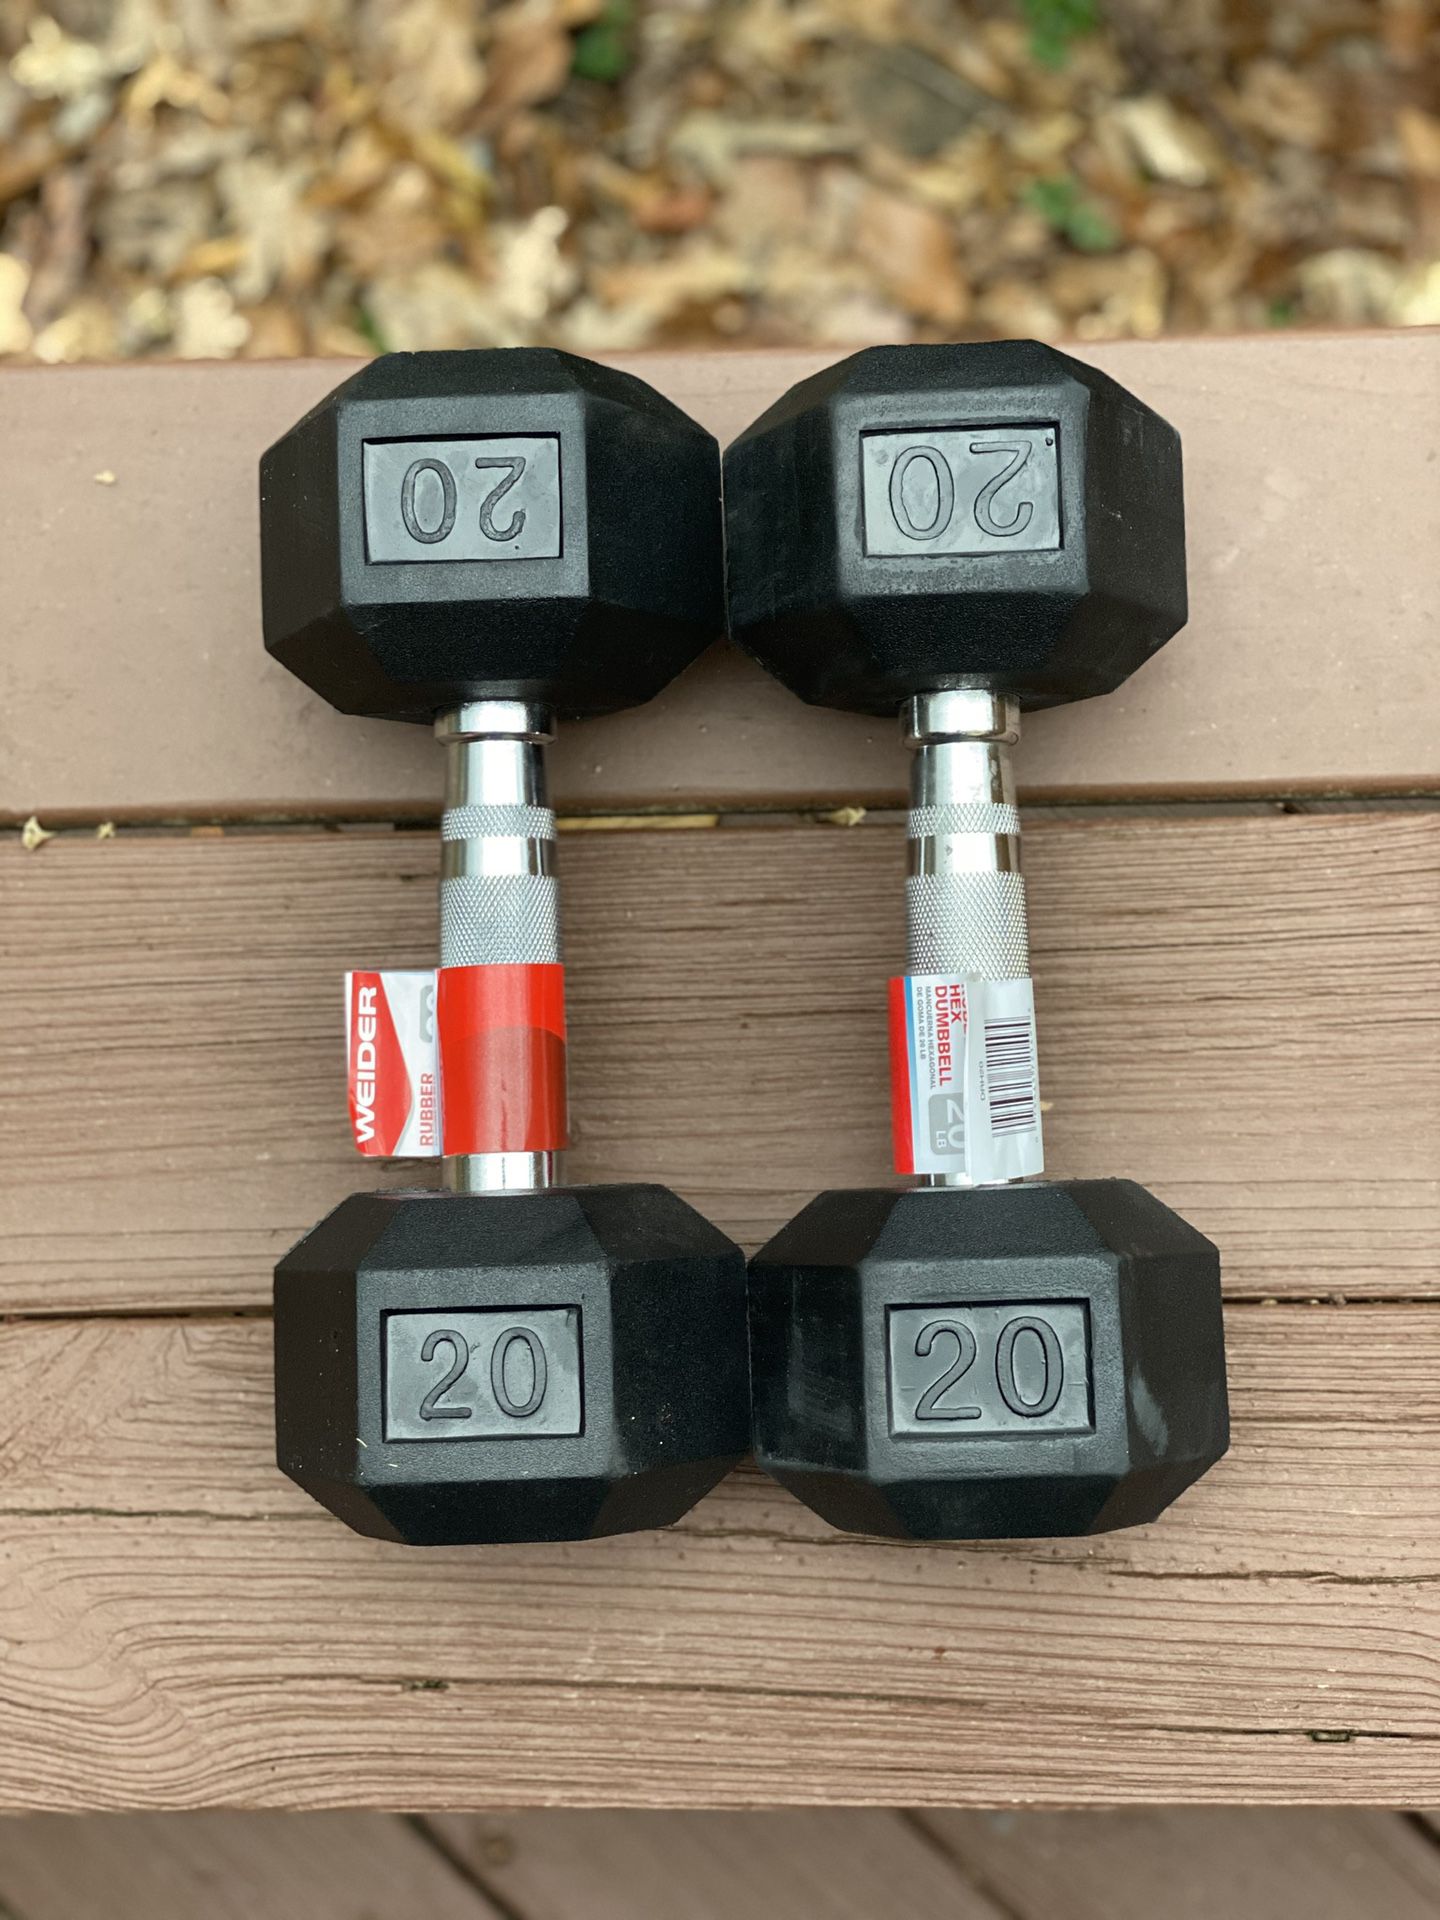 20 lbs pounds dumbbell pair rubberized hex brand new compare with Bowflex